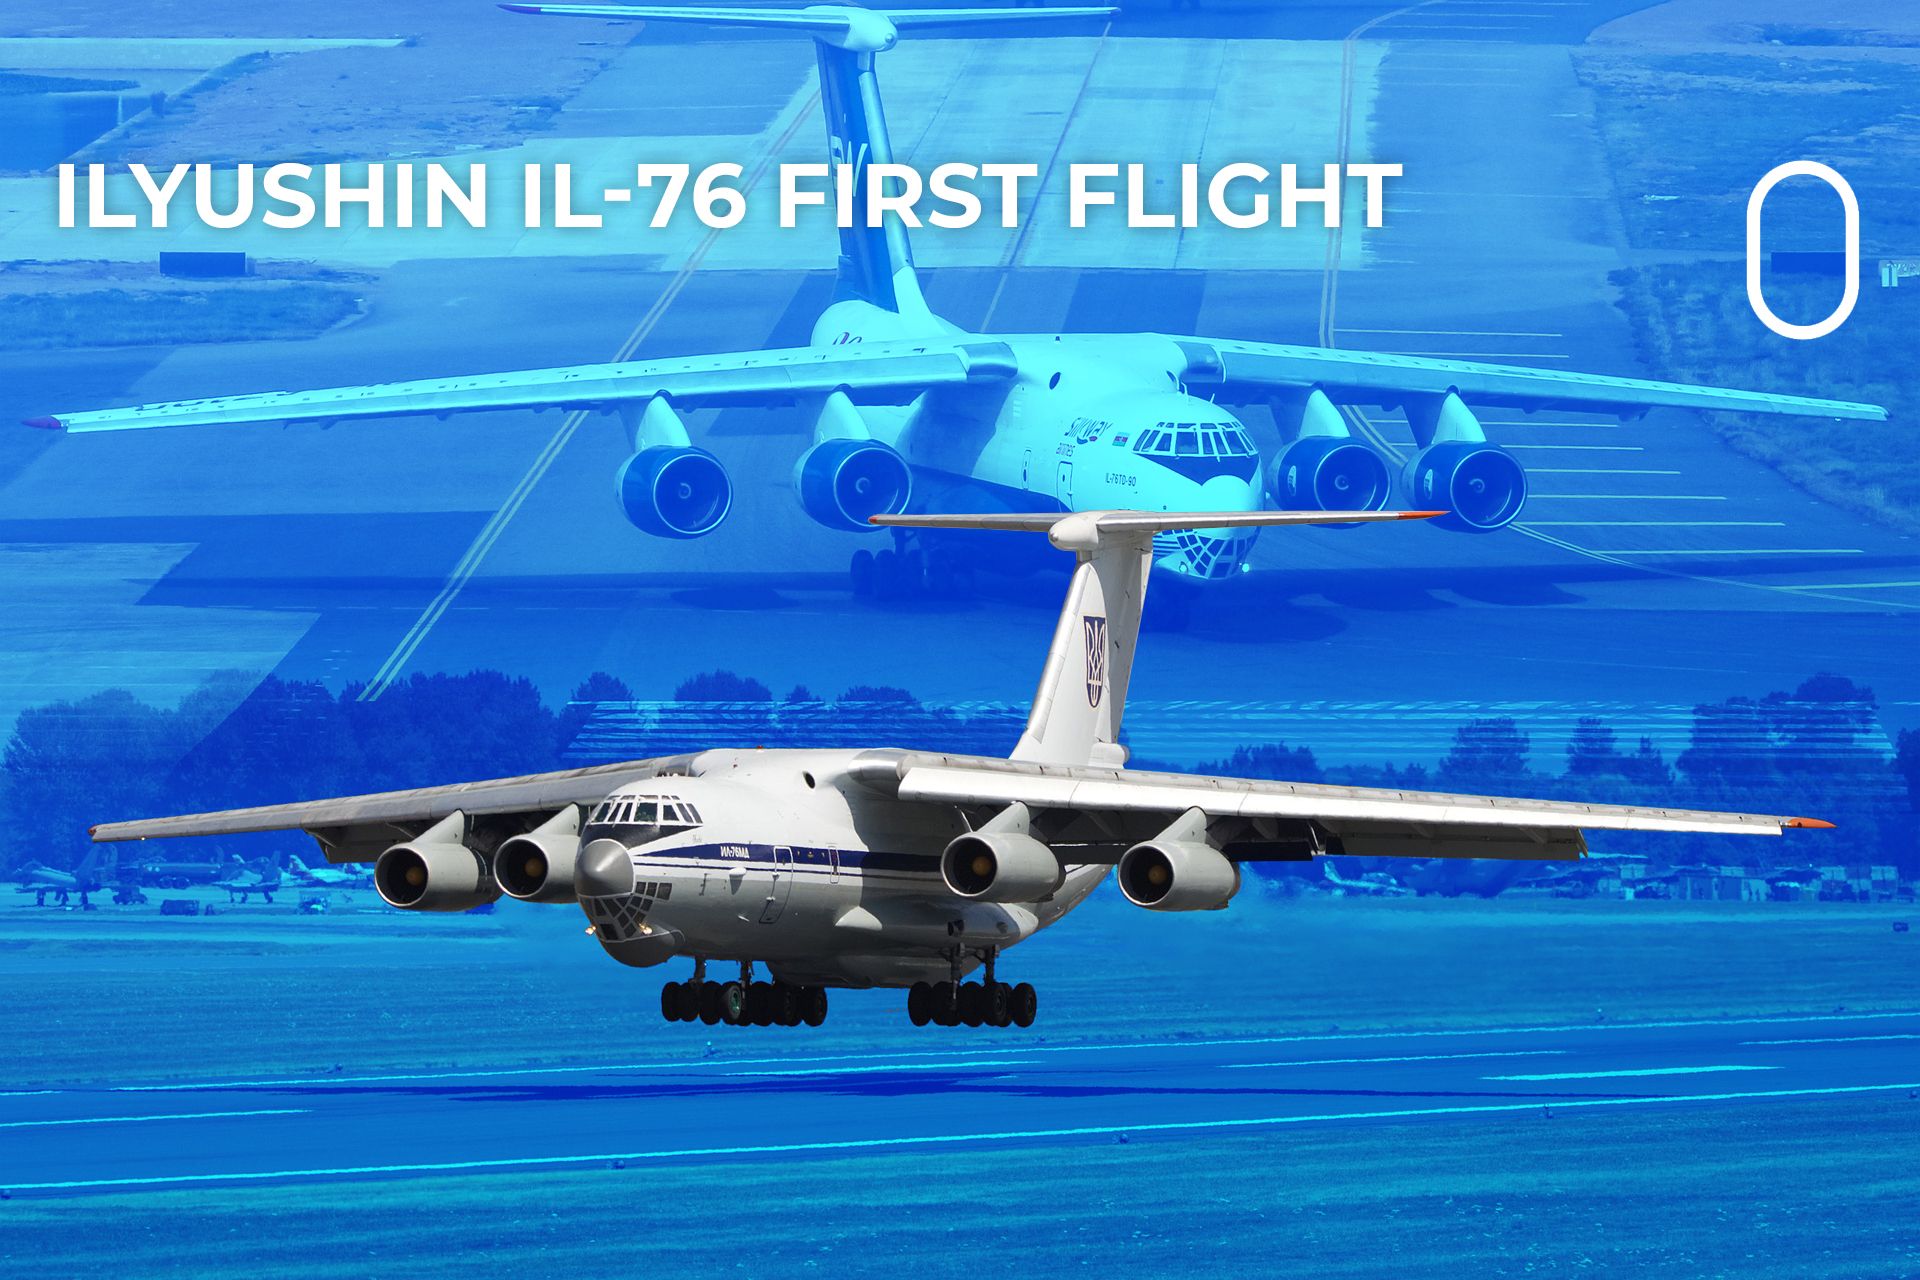 52 Years In the past Right this moment The Ilyushin Il-76 Made Its First Flight